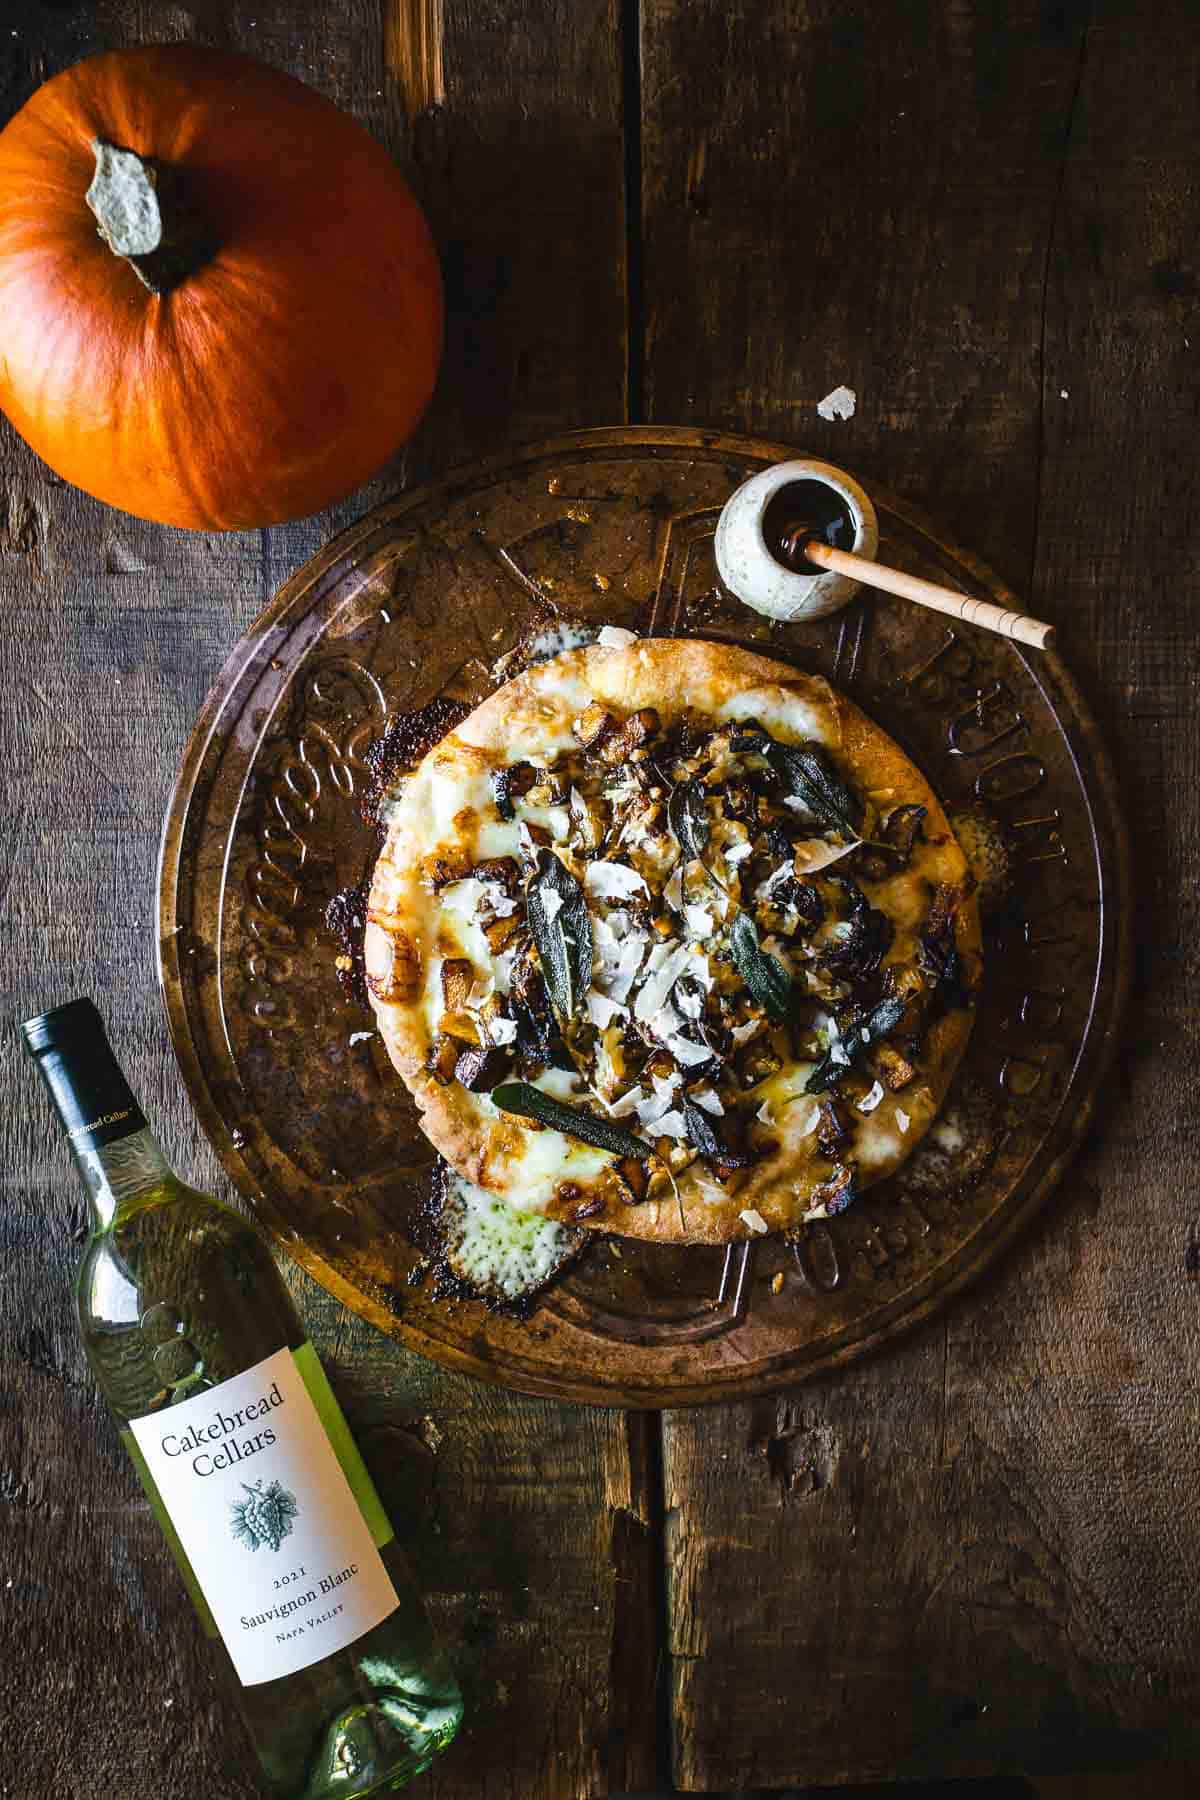 A pizza on a plate next to a bottle of wine.